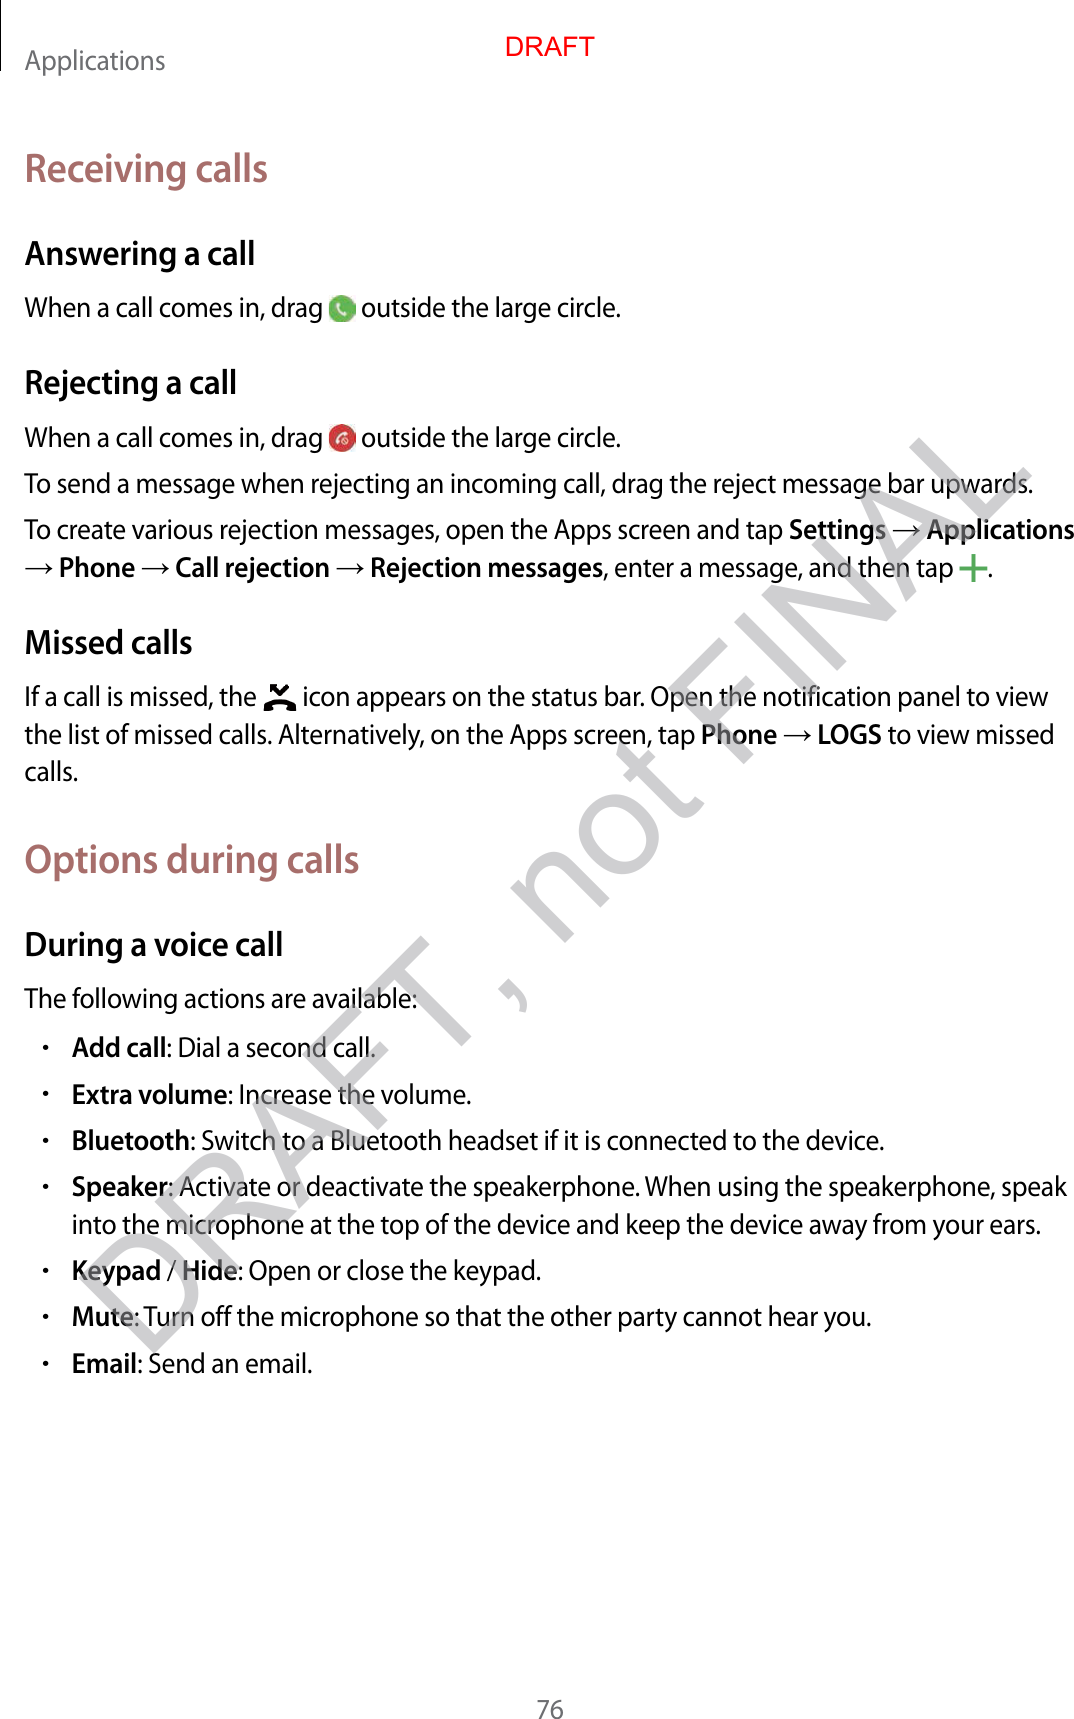 Applications76Receiving callsAnsw ering a callWhen a call comes in, drag   outside the large cir cle .Rejecting a callWhen a call comes in, drag   outside the large cir cle .To send a message when rejecting an incoming call, dr ag the r eject message bar upwards .To creat e various r ejection messages, open the Apps scr een and tap Settings  Applications  Phone  Call r ejection  Rejection messages, enter a message , and then tap  .Missed callsIf a call is missed, the   icon appears on the status bar. Open the notification panel t o view the list of missed calls. Alt ernativ ely, on the Apps scr een, tap Phone  LOGS to view missed calls.Options during callsDuring a voic e callThe f ollowing actions are a vailable:•Add call: Dial a second call.•Extra volume: Increase the volume .•Bluetooth: Switch t o a Bluetooth headset if it is c onnected to the device.•Speaker: Activate or deactivate the speakerphone . When using the speakerphone , speak into the micr ophone at the t op of the device and keep the devic e a wa y fr om y our ears .•Keypad / Hide: Open or close the keypad.•Mute: Turn off the microphone so tha t the other party cannot hear you.•Email: Send an email.DRAFTDRAFT, not FINAL